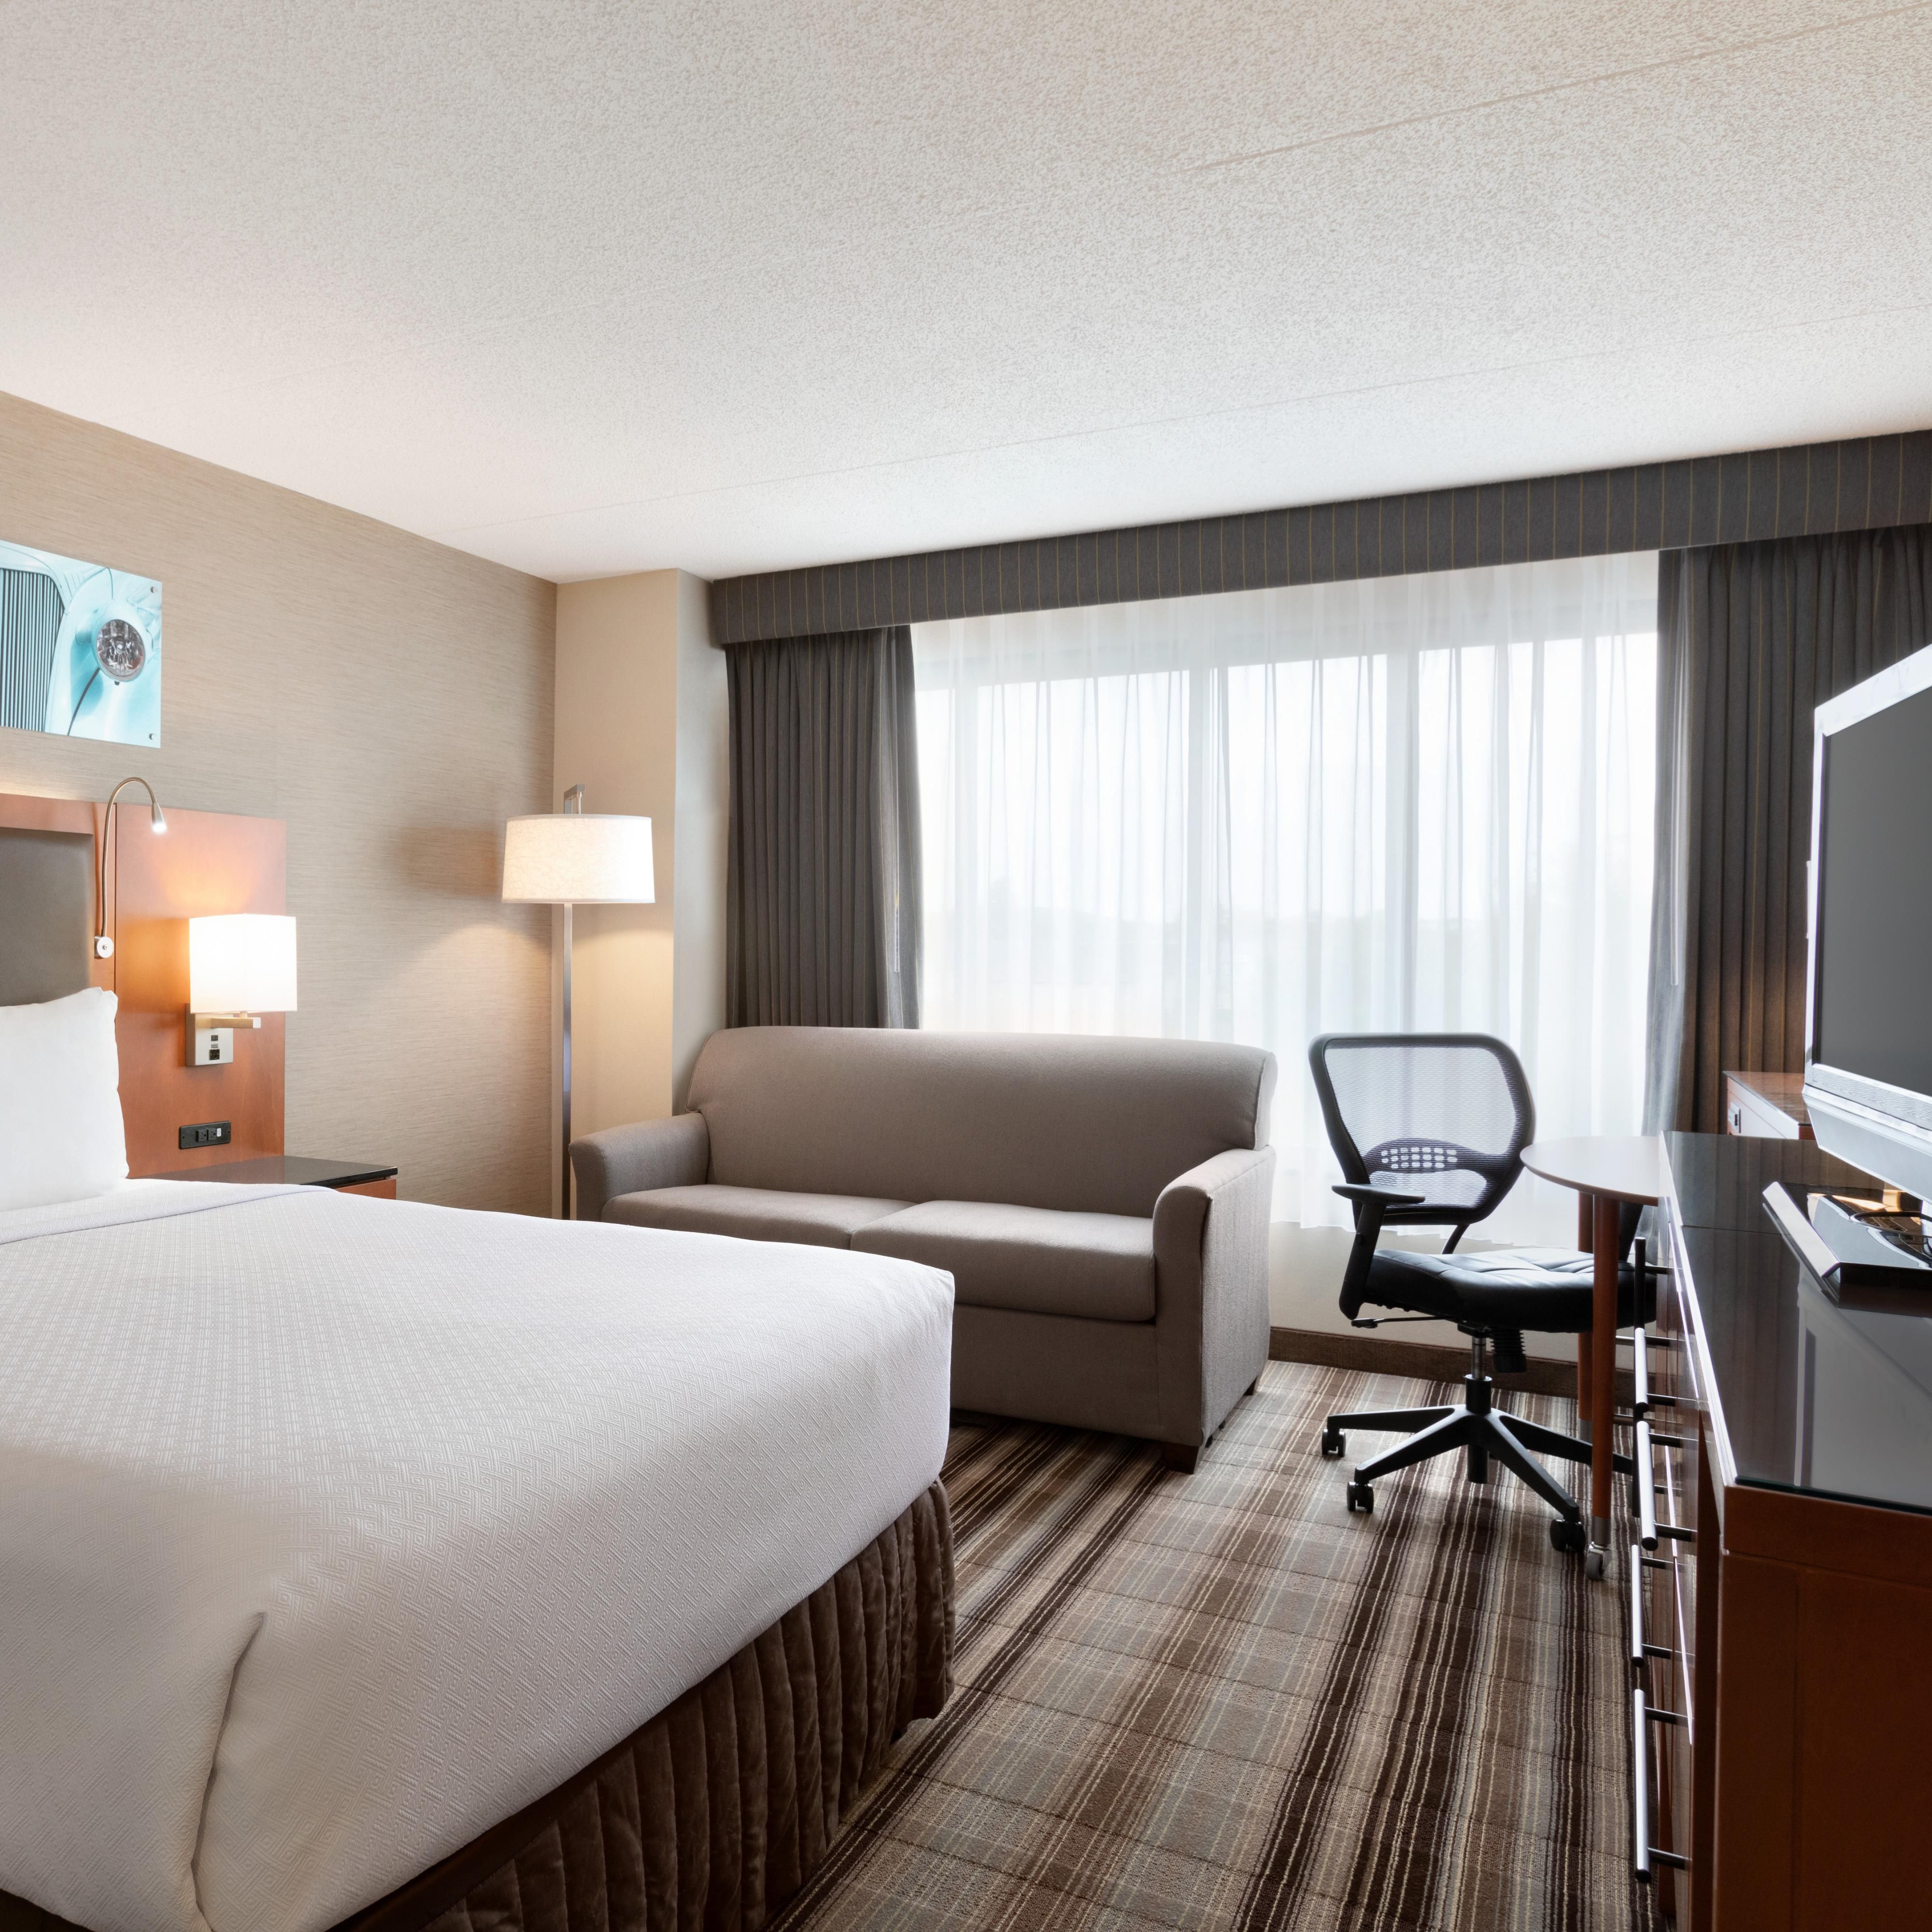 Enjoy comfort, space and style in our standard queen guest room.